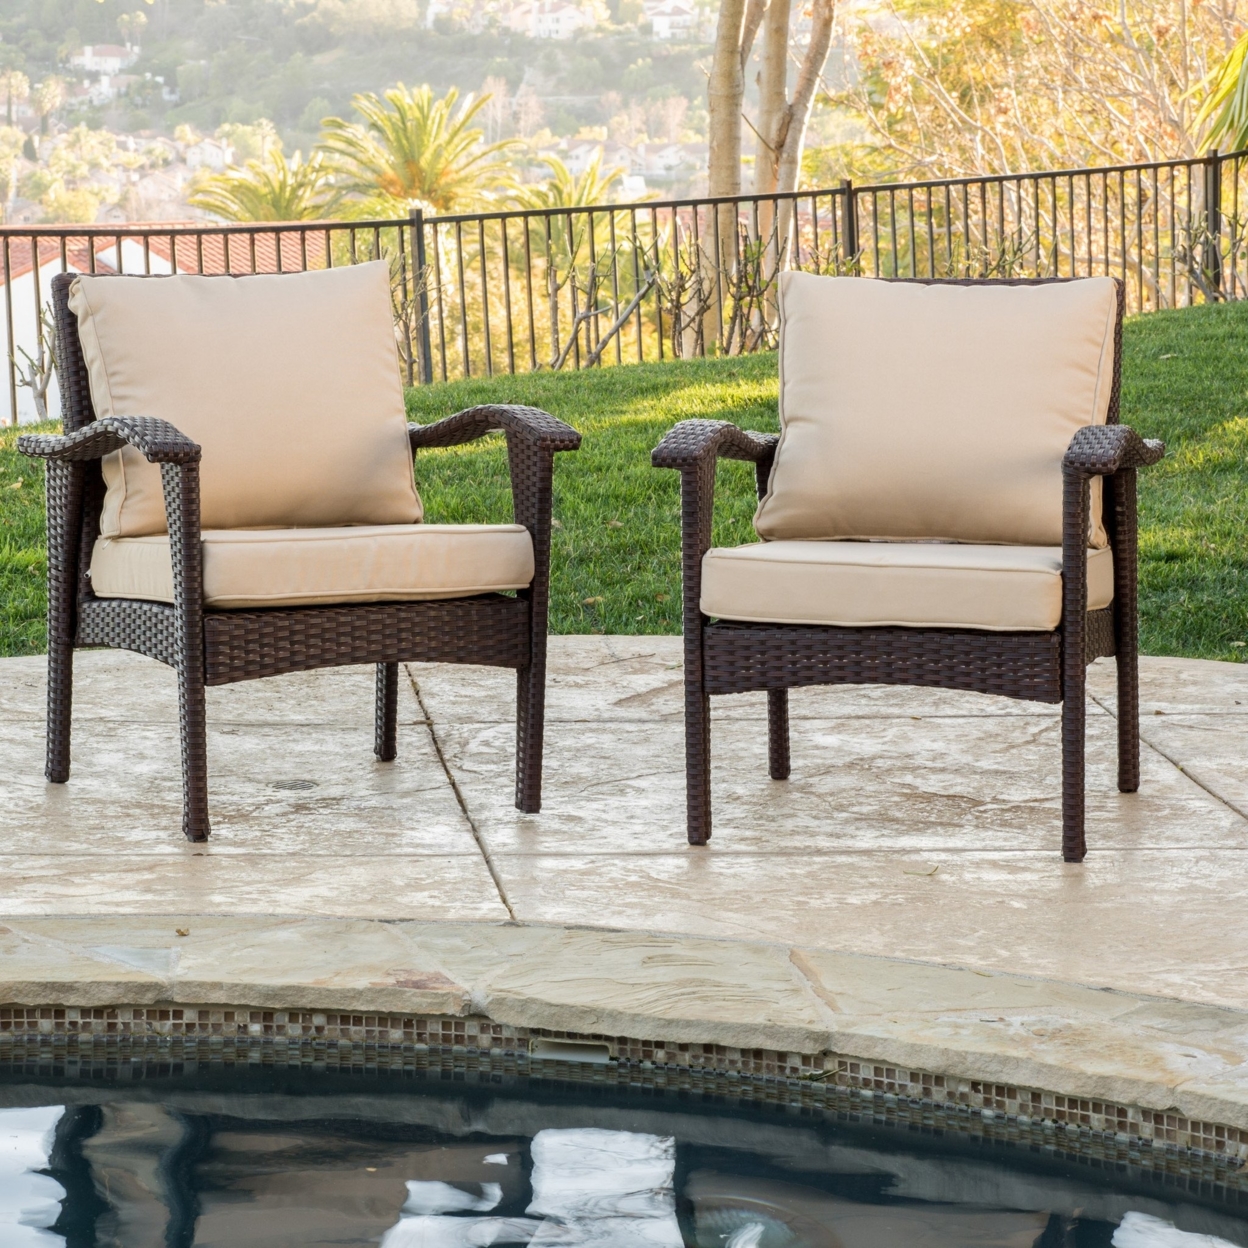 Bleecker Outdoor Brown Wicker Club Chair With Cushion (Set Of 2)